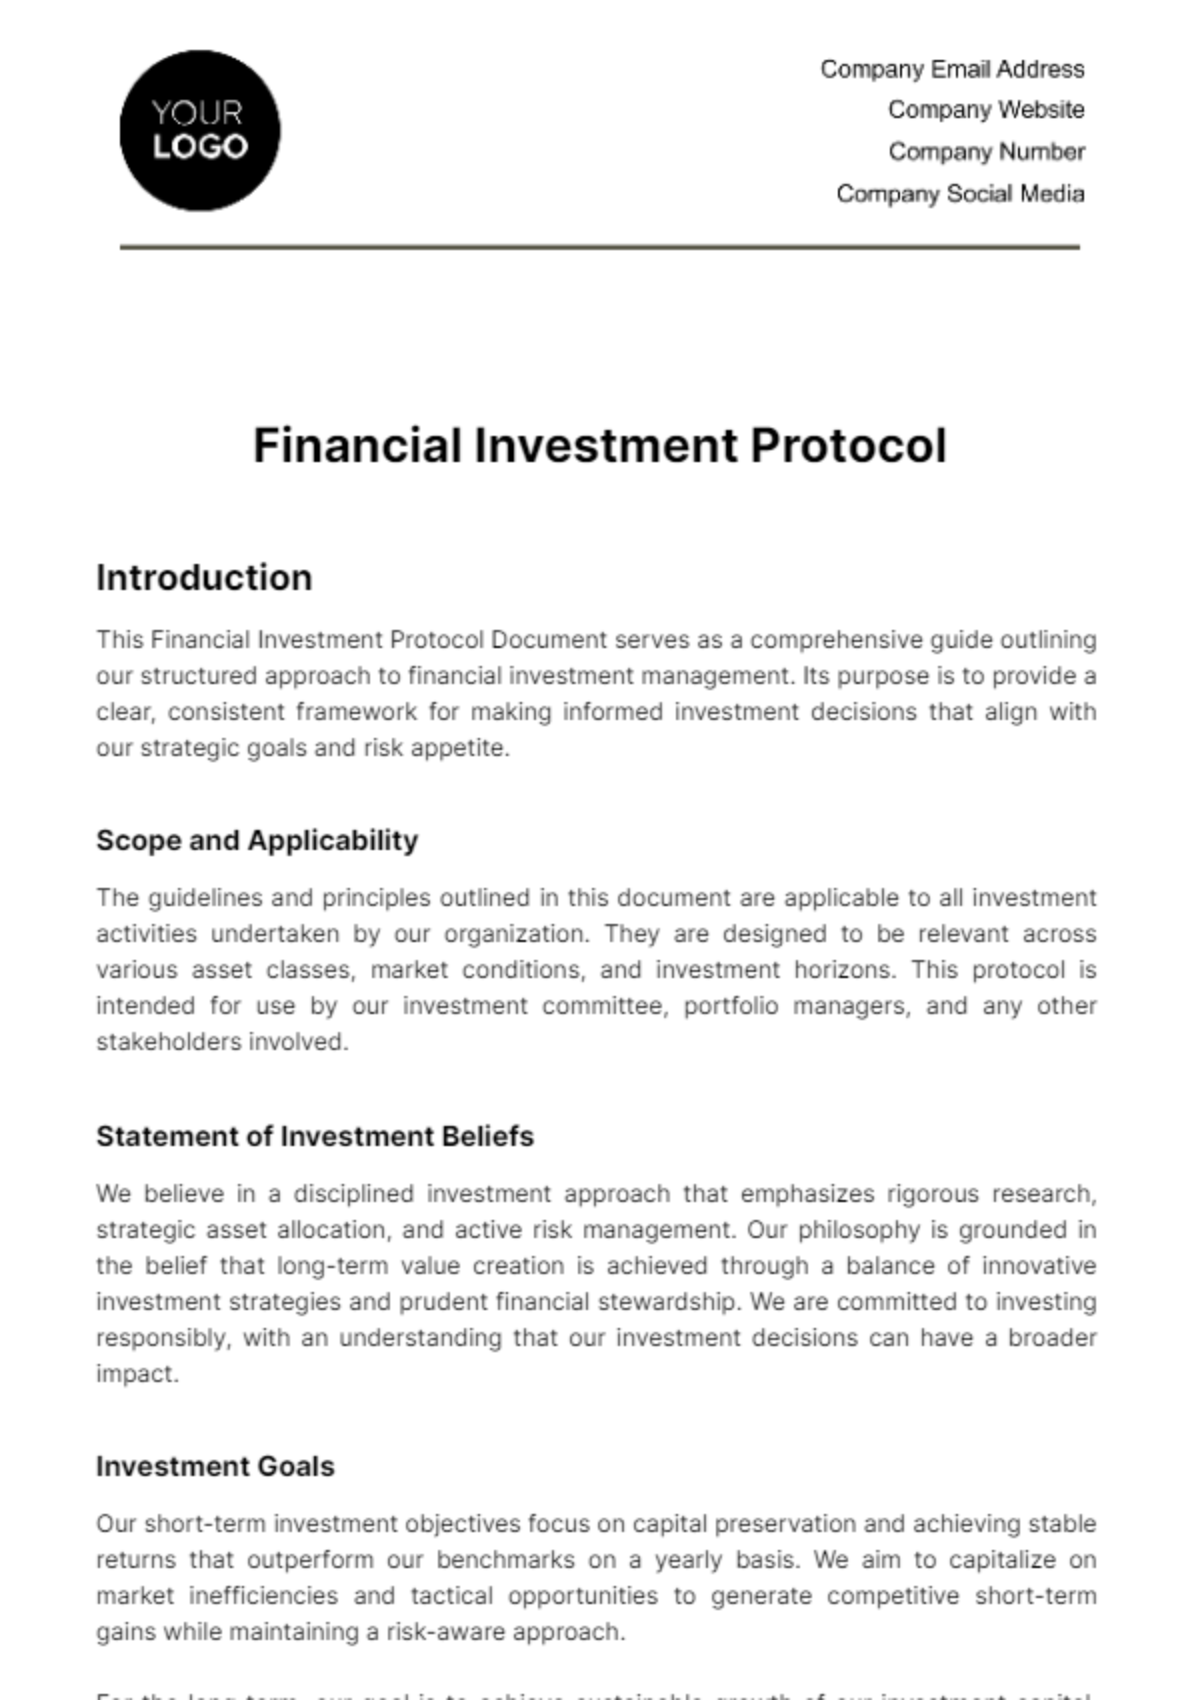 Free Financial Investment Protocol Template